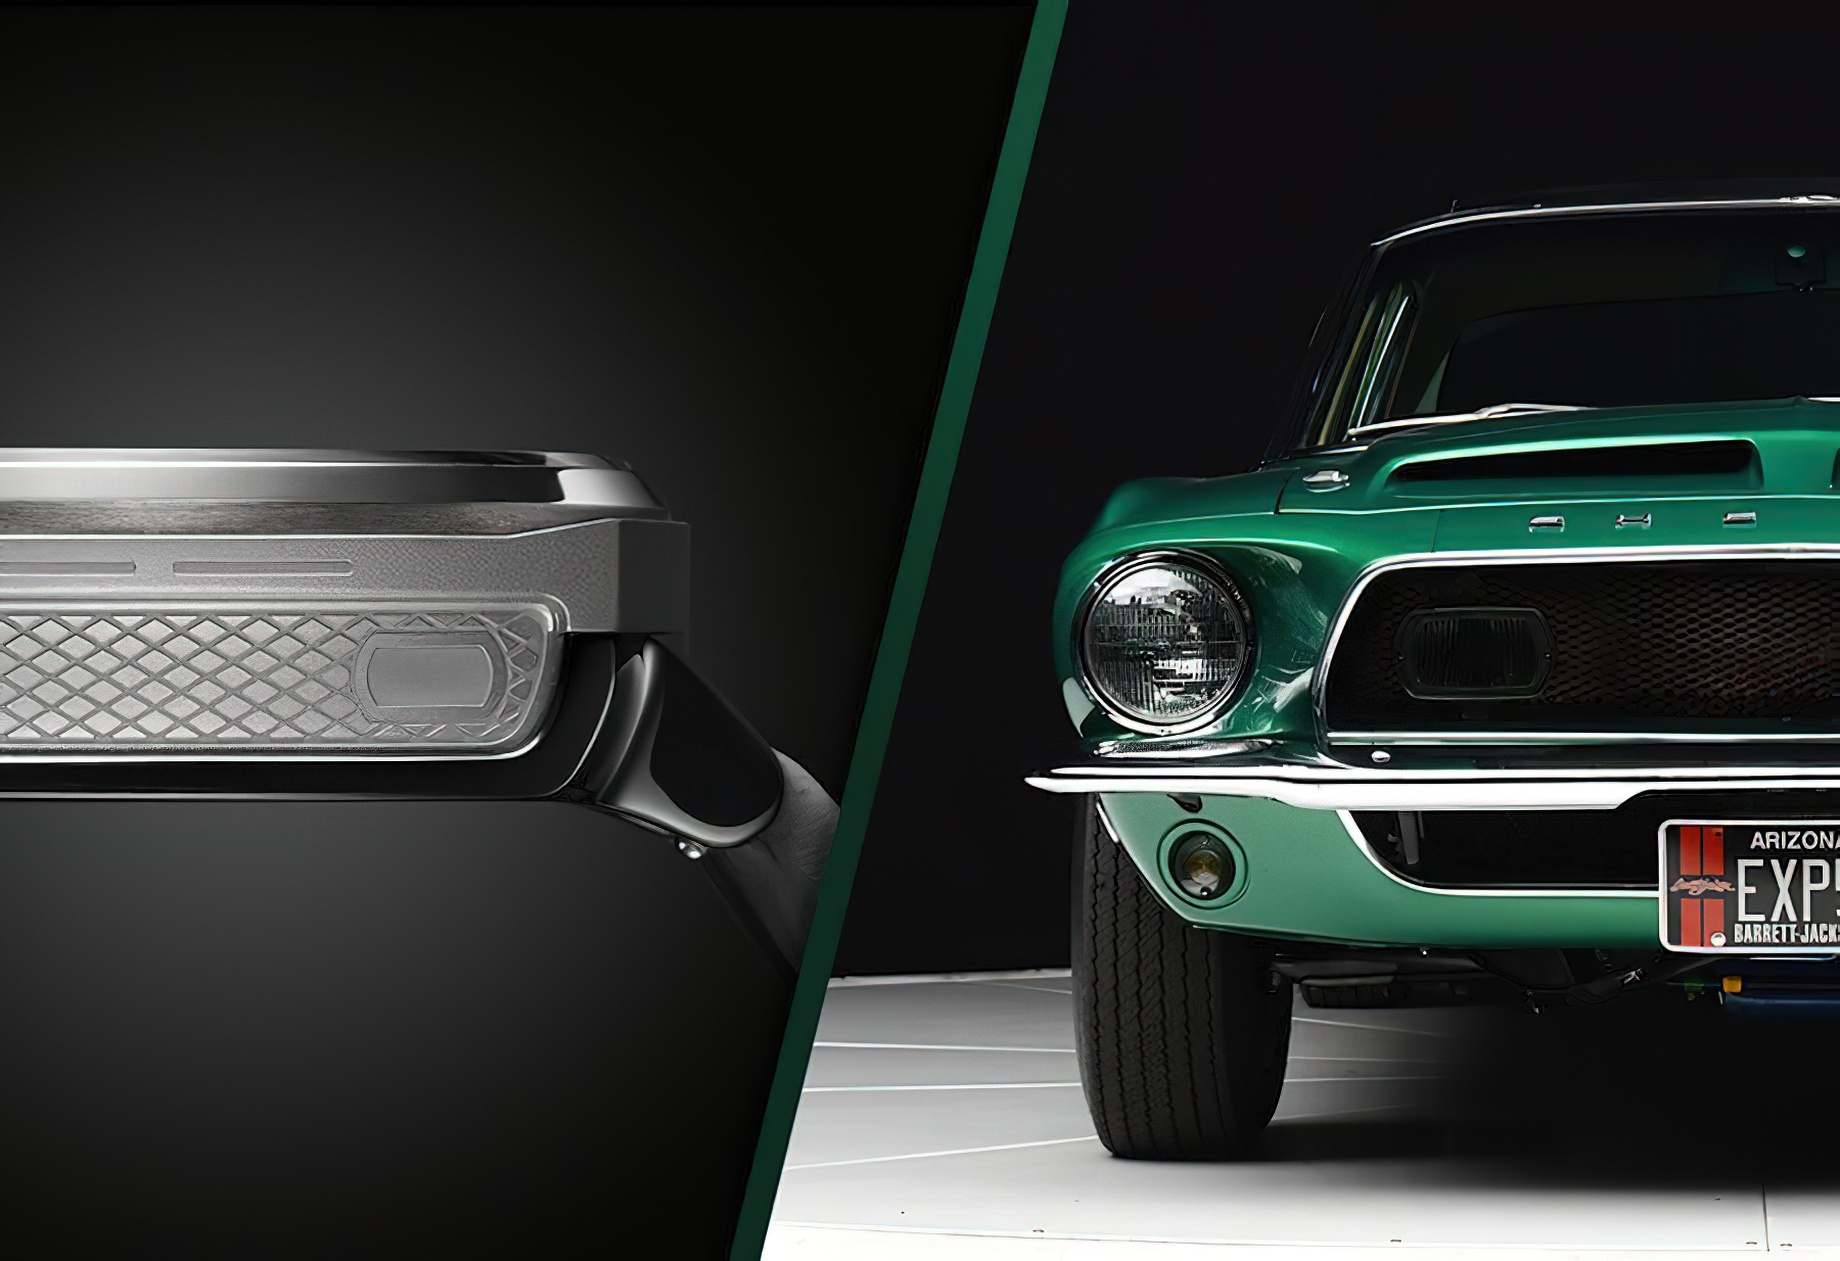 P-51 Green Hornet Limited Collection – REC Watches